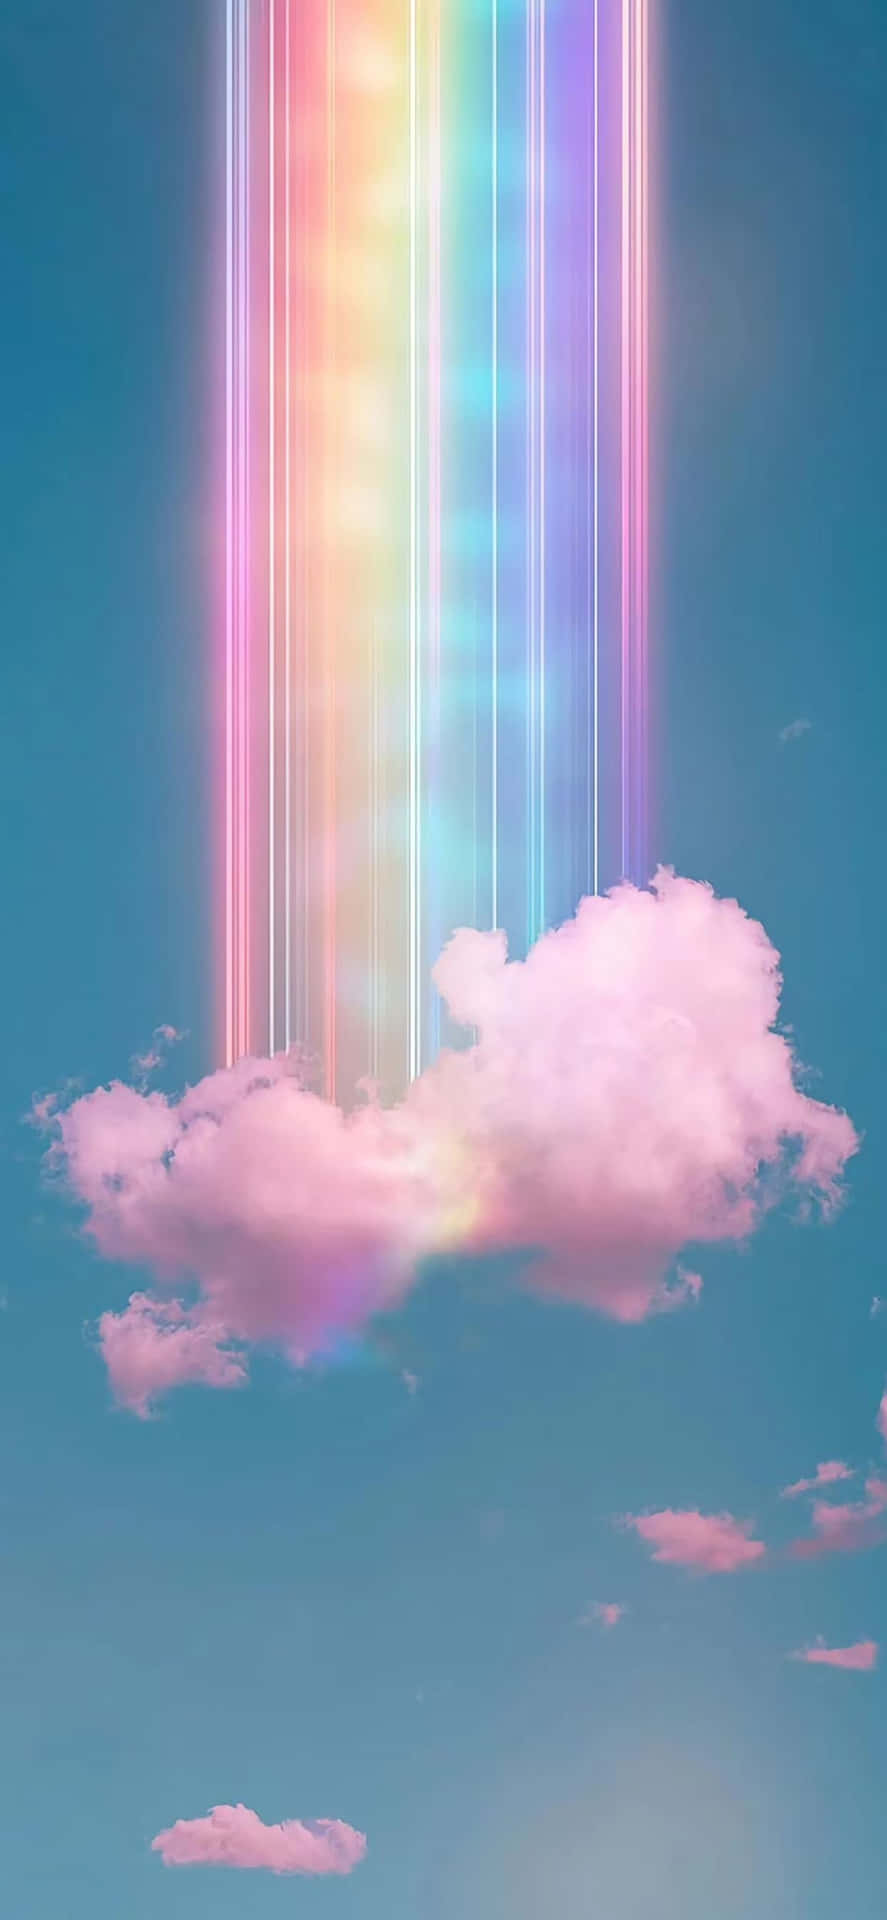 Rainbows In The Sky With Clouds